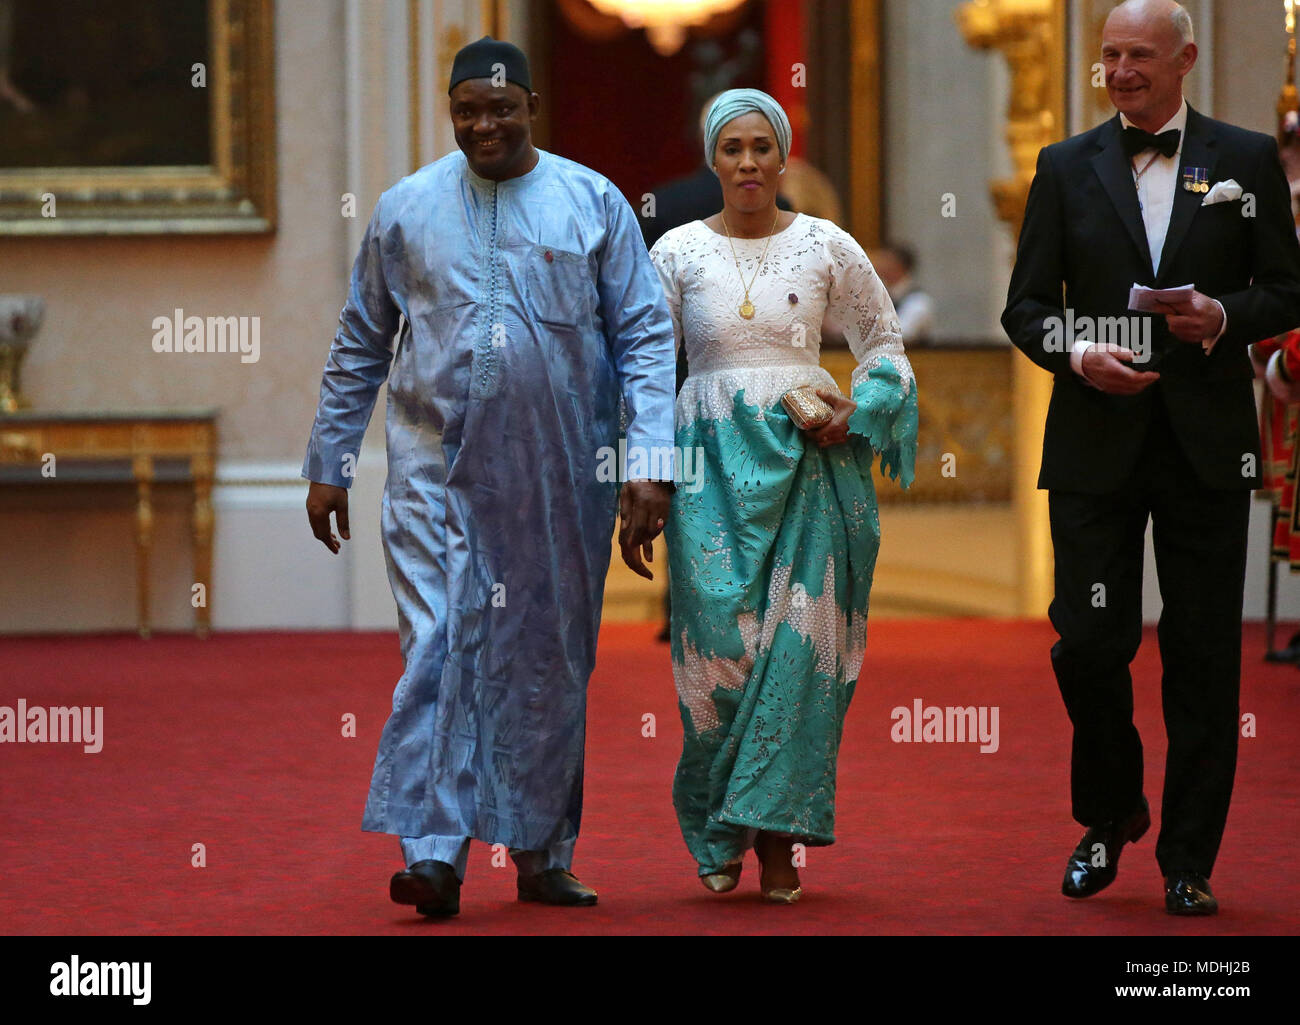 The Gambia's President Adama Barrow (left) arrives in the East Gallery at Buckingham Palace in London as Queen Elizabeth II hosts a dinner during the Commonwealth Heads of Government Meeting. Stock Photo